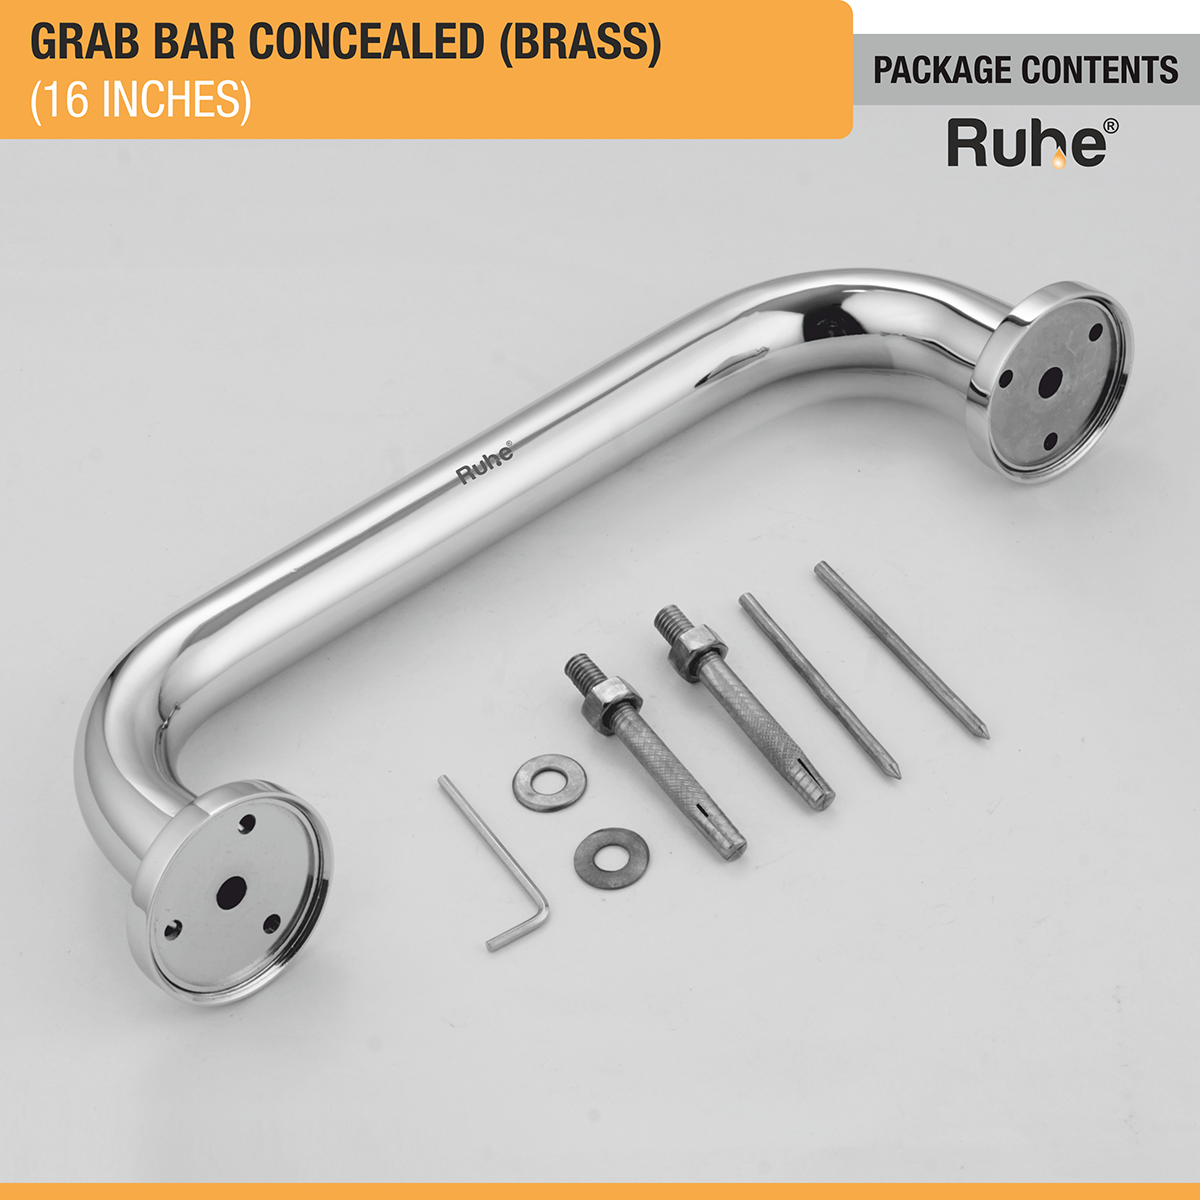 Brass Grab Bar Concealed (16 inches) package content